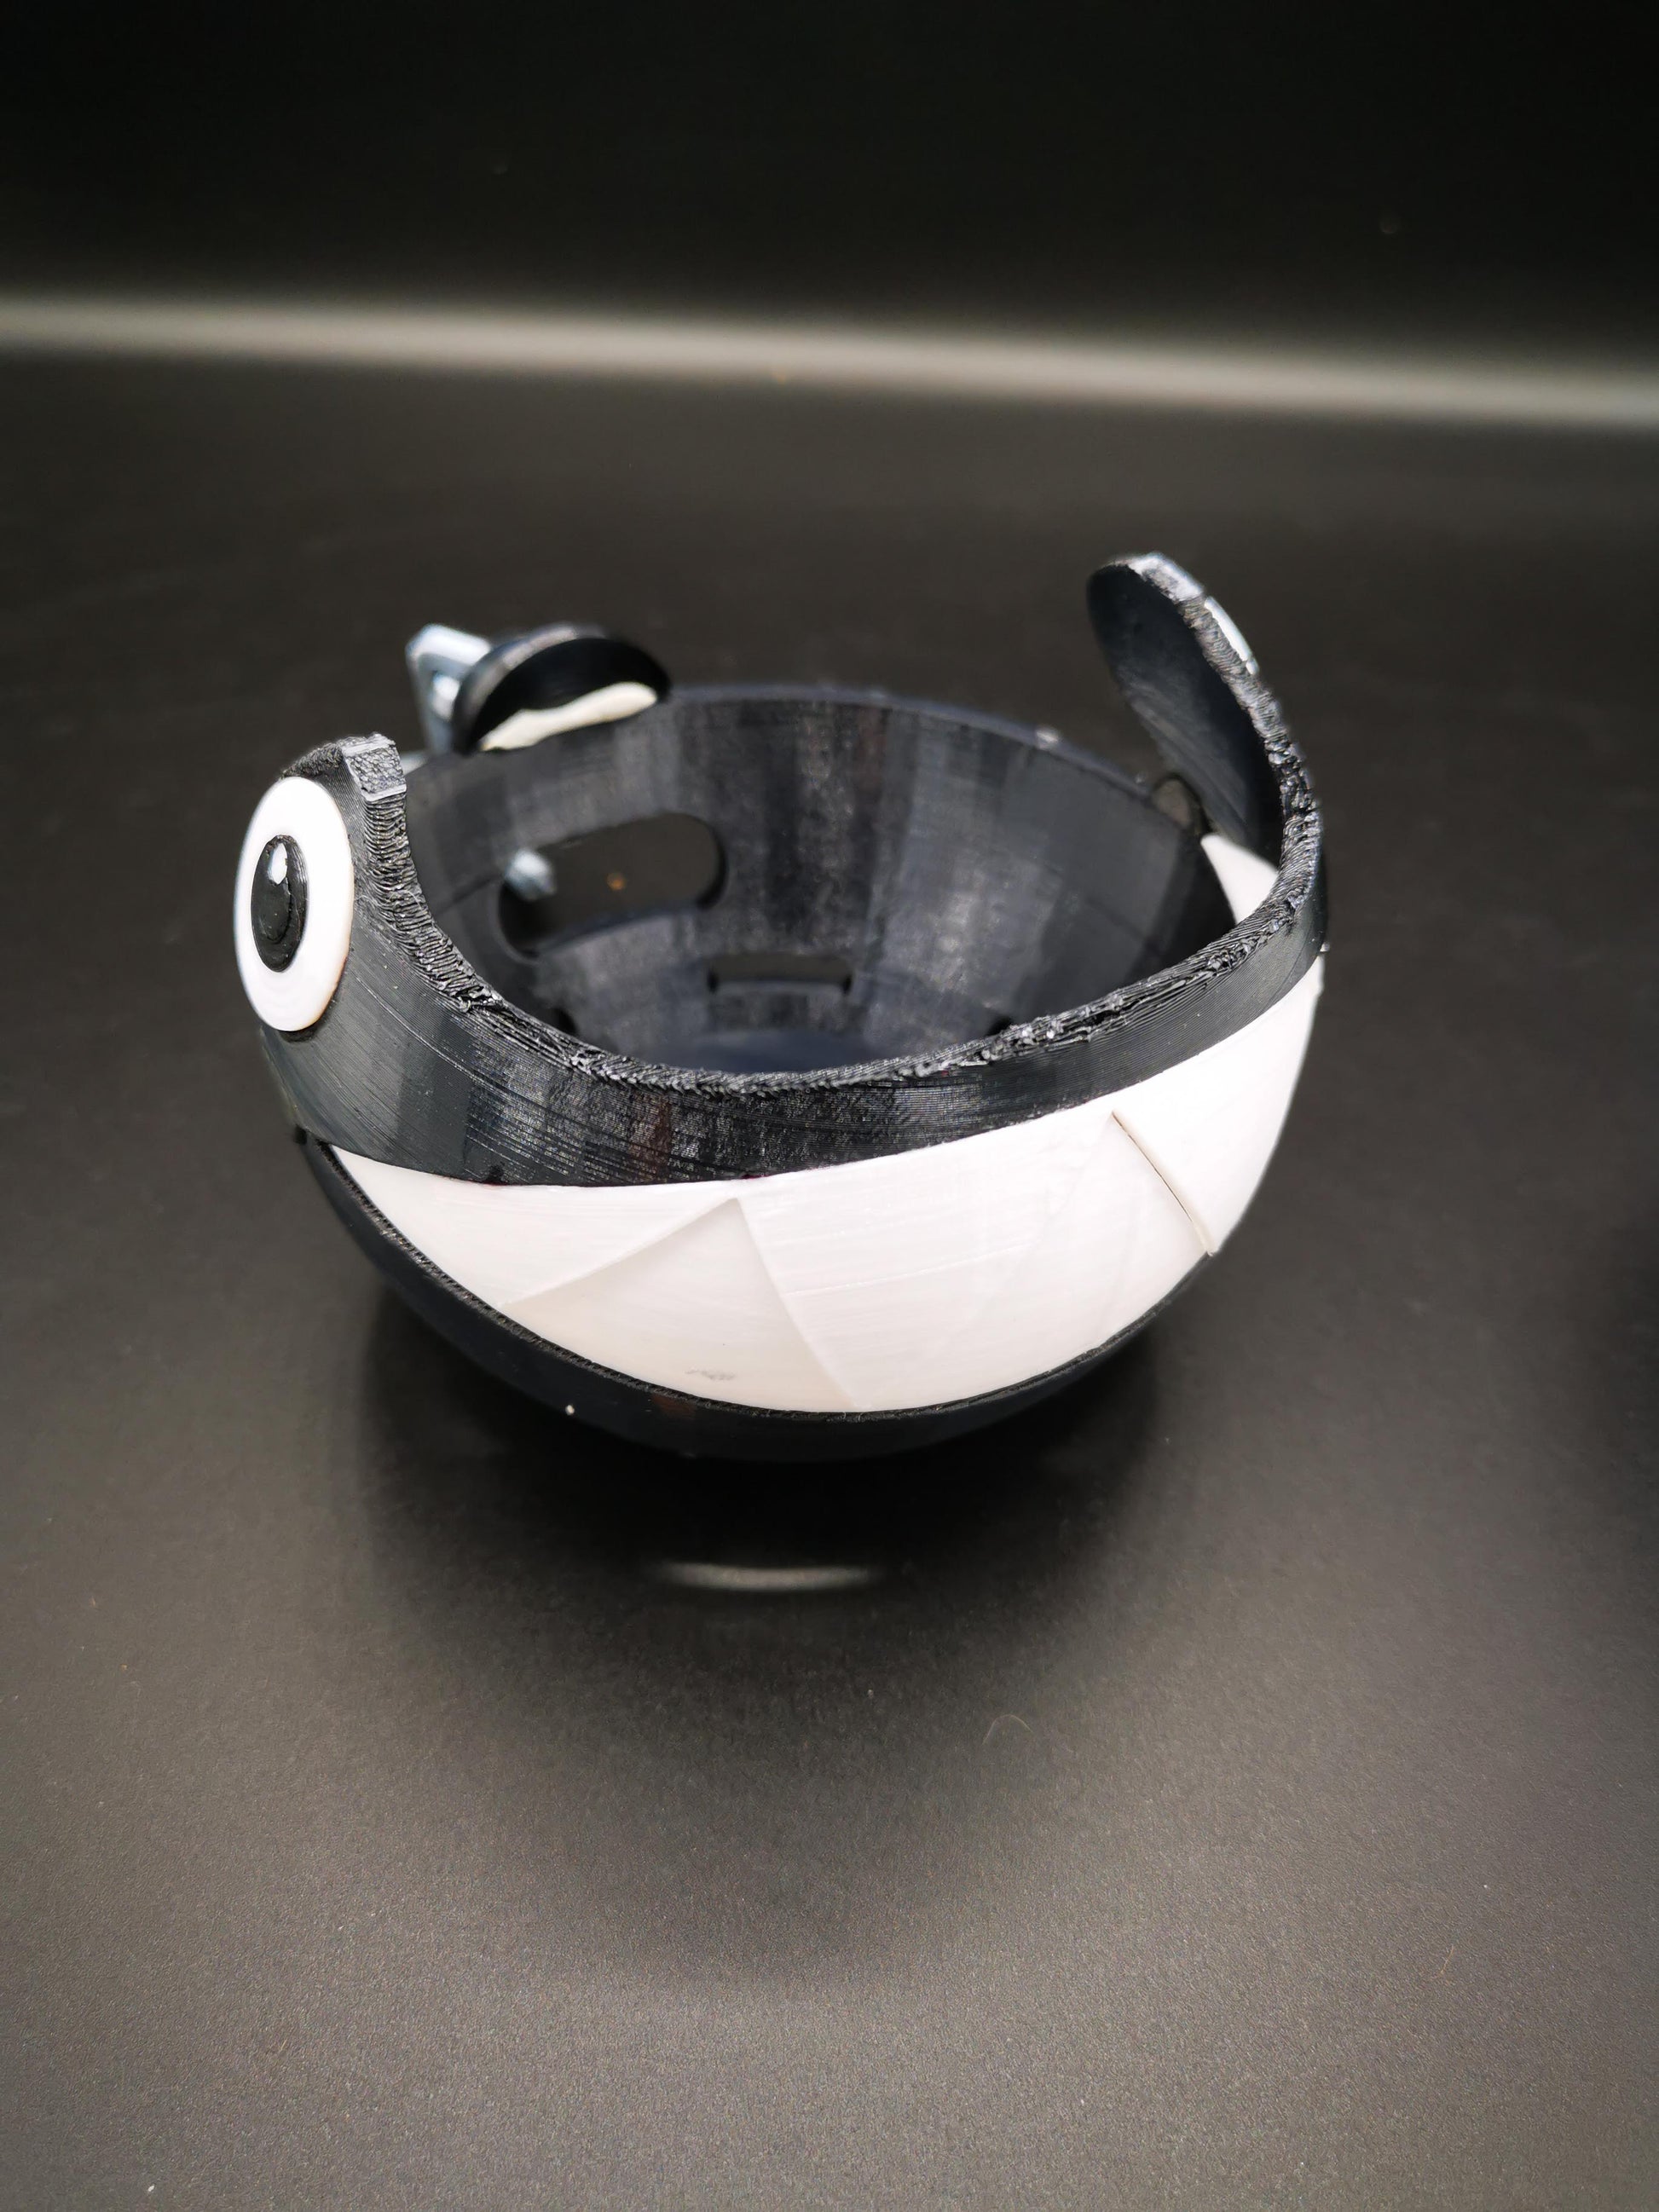 Chain Chomp Alexa Echo holder without Alexa Echo from front side angle